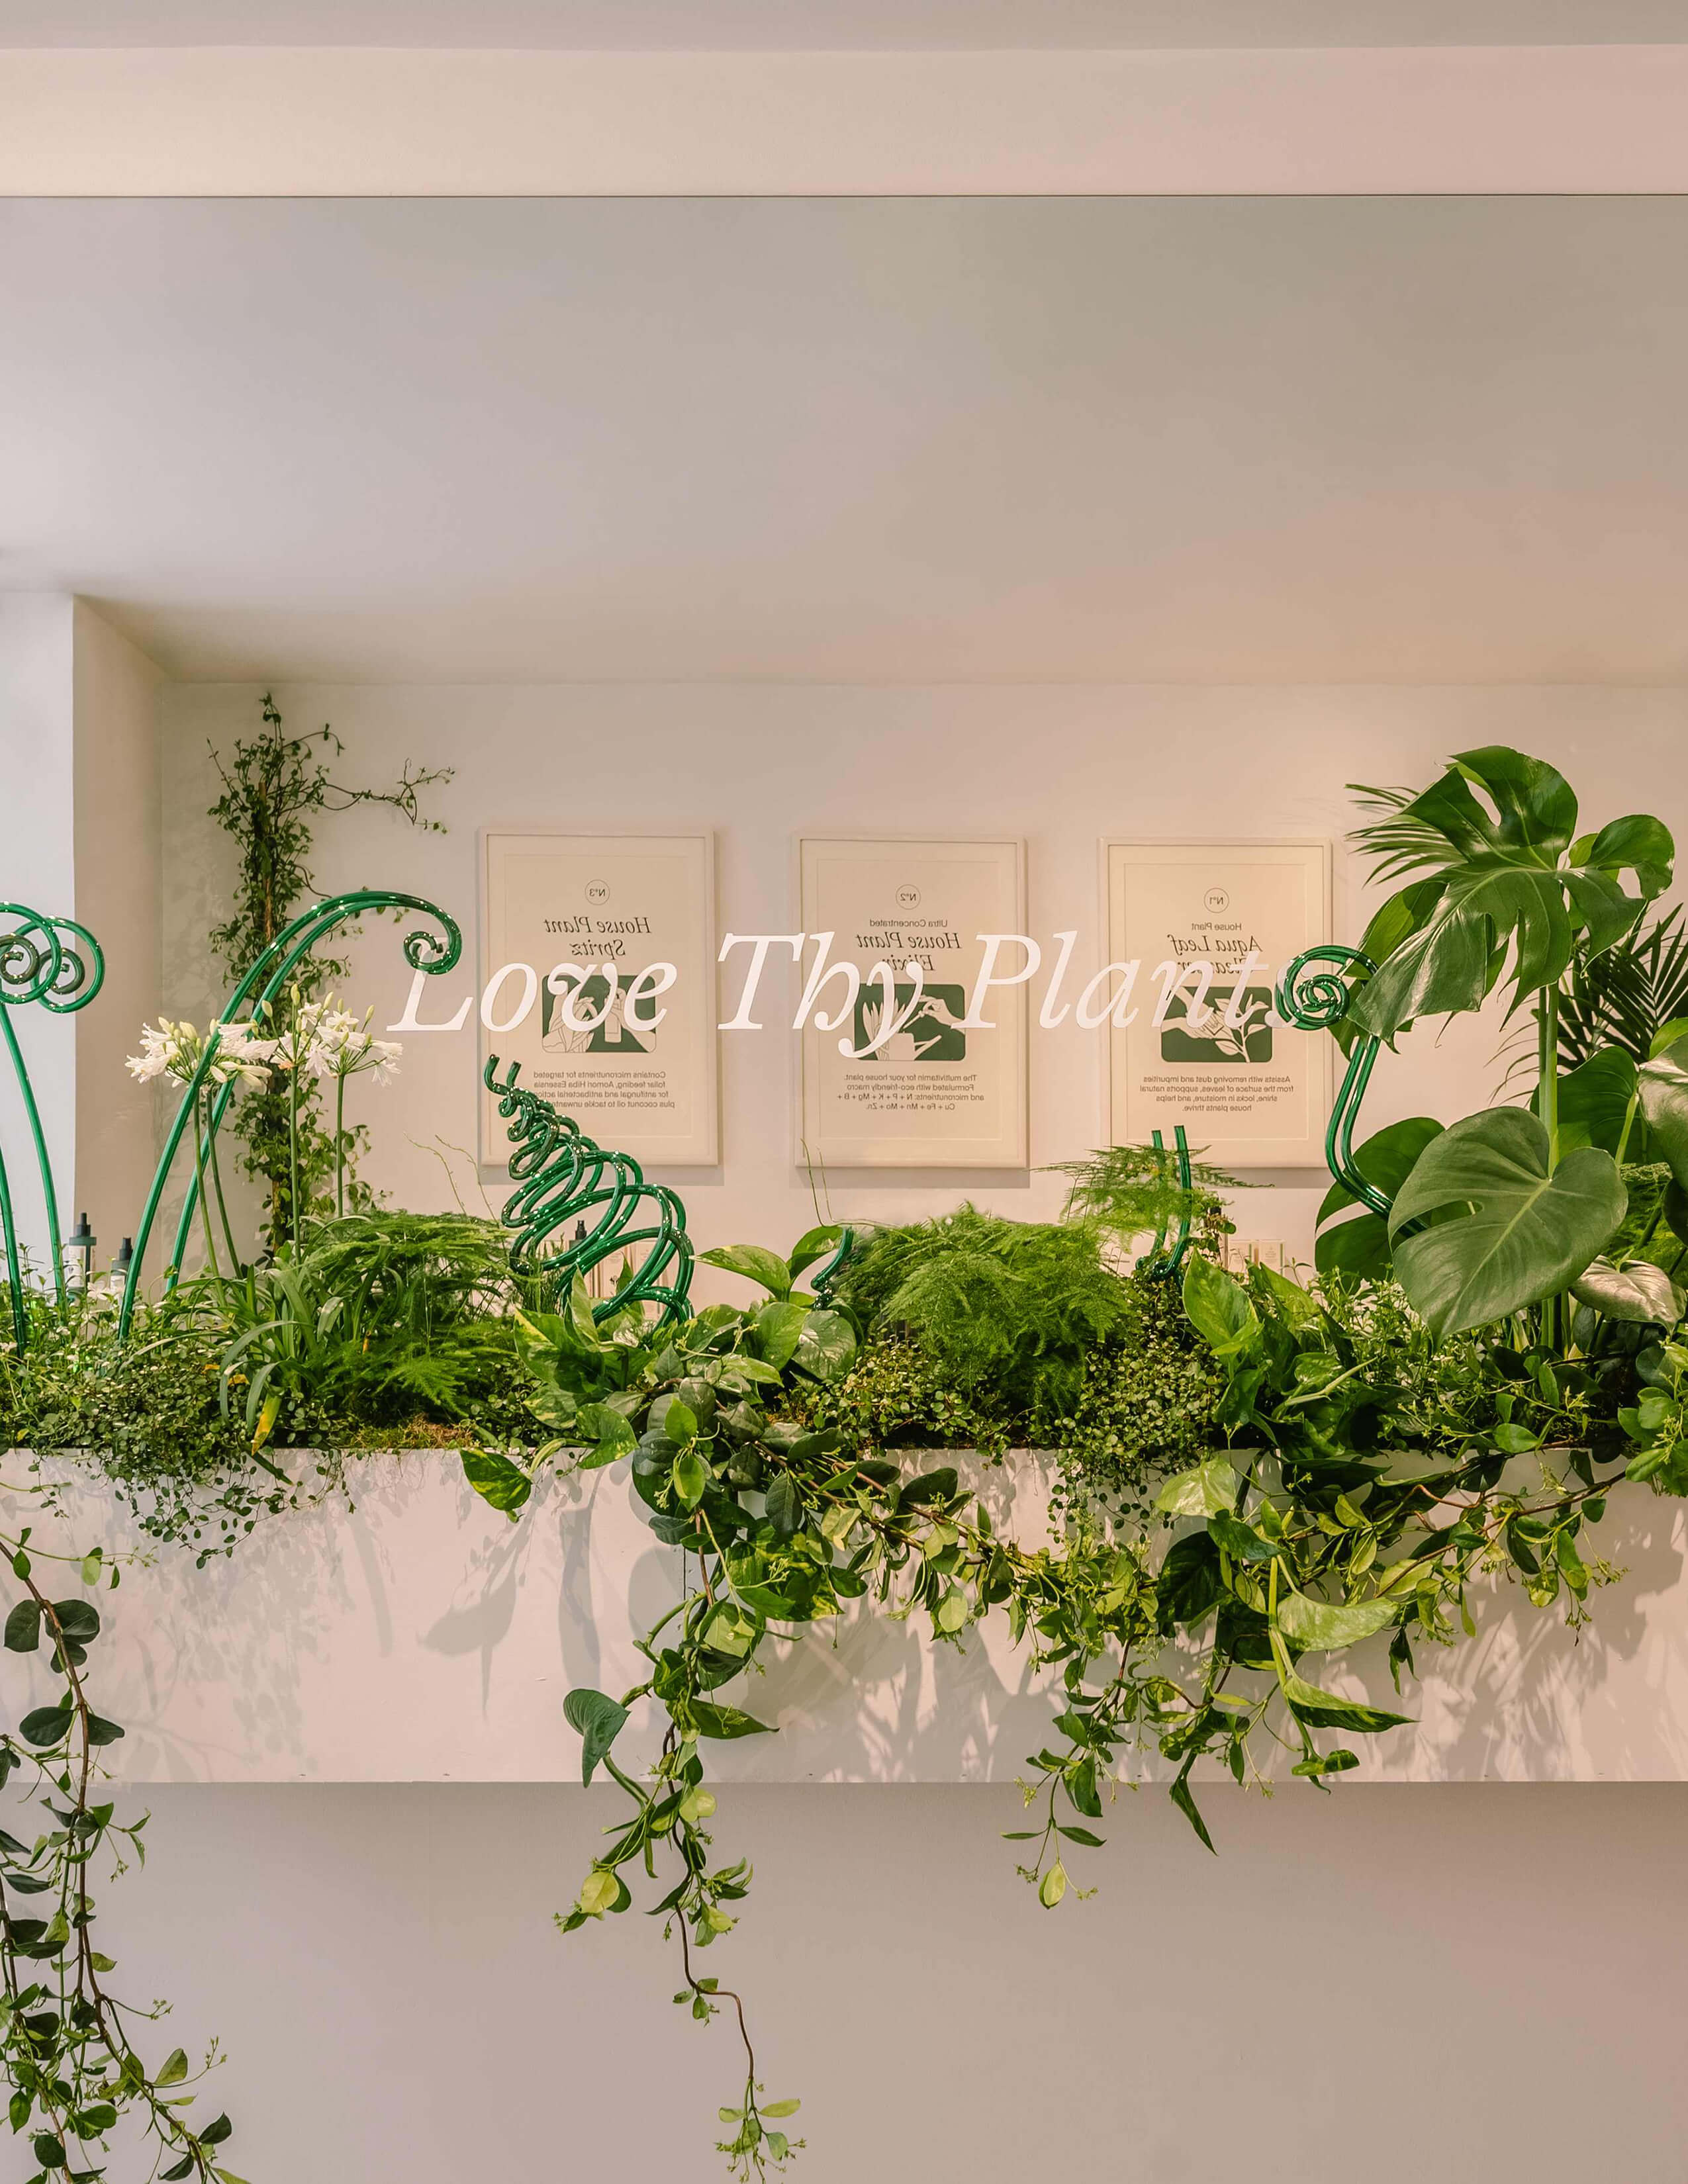 The decoration inside the store with loads of different kinds of plants, the ‘Love Thy Plant’ labelled sticker on the glass and three posters of Sowvital house plant products.